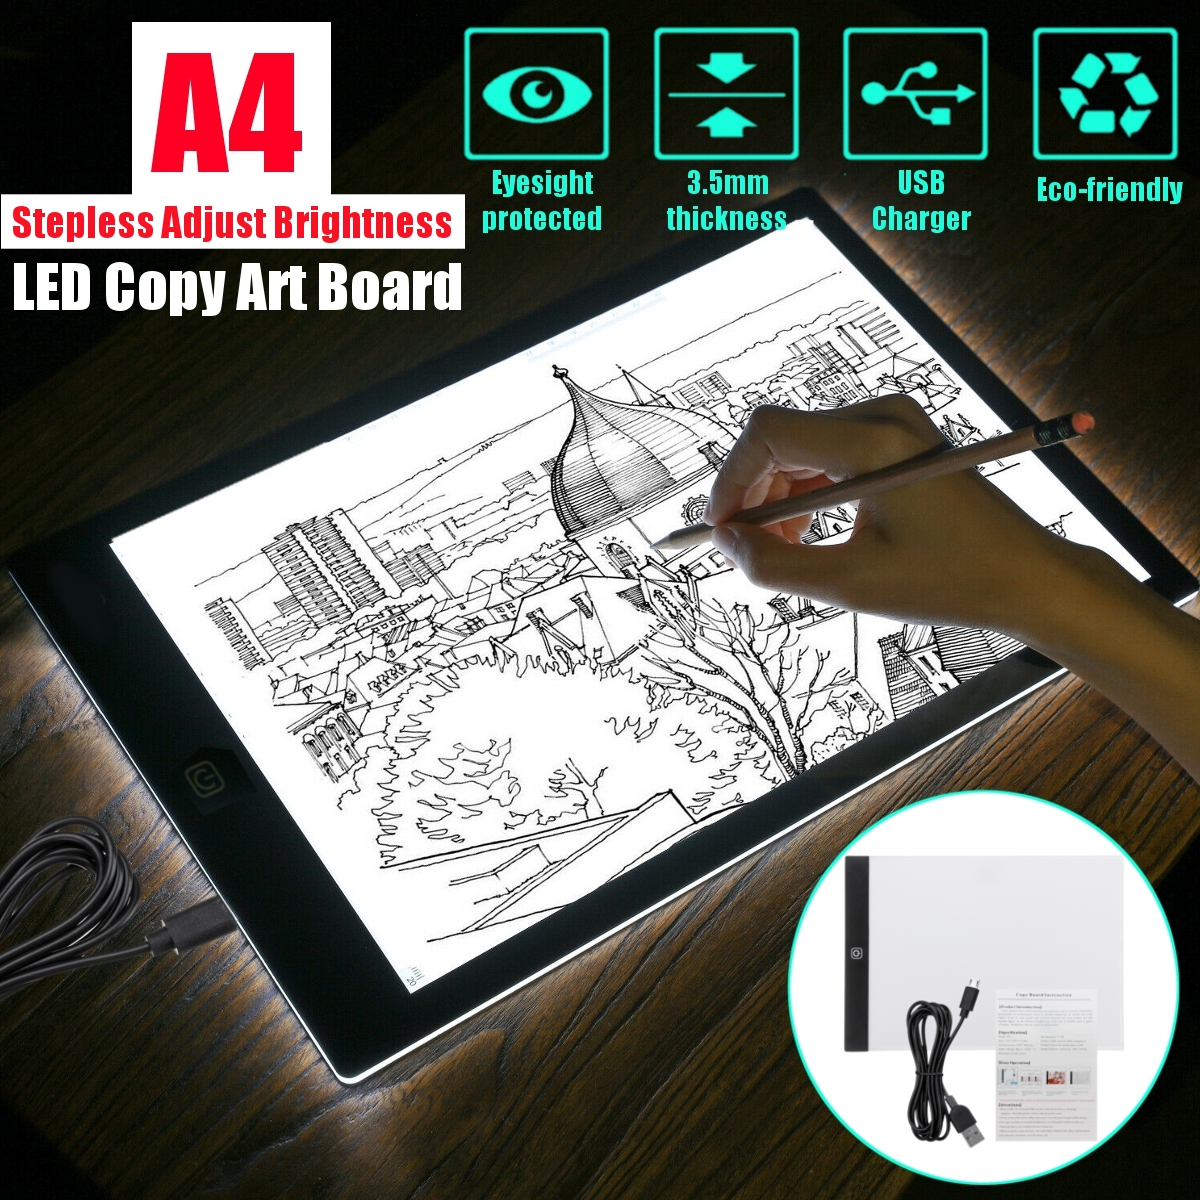 A4-Size-Stepless-Dimming-LED-Copy-Table-Copying-Drawing-Board-Handwritten-Comic-Sketch-Light-Guide-P-1628037-9